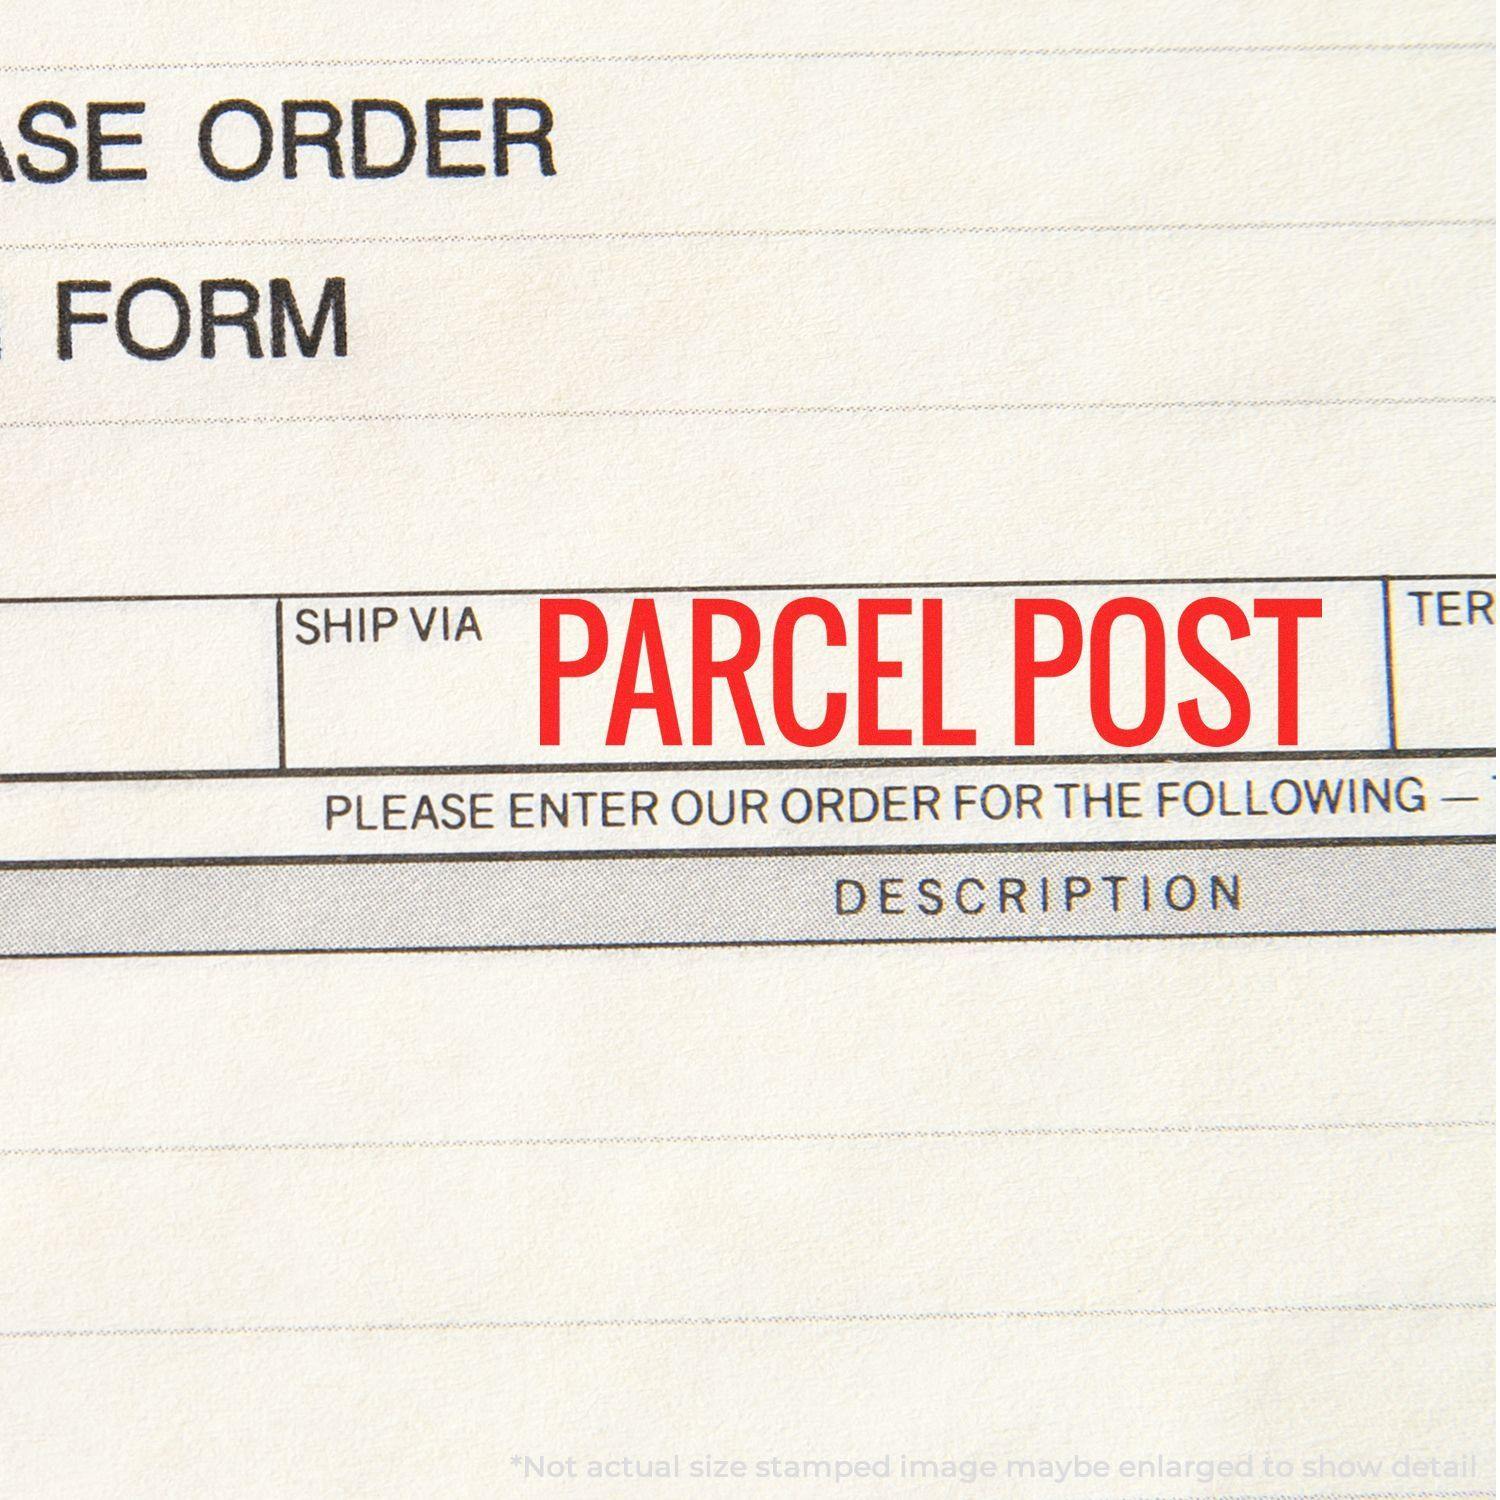 A stock office rubber stamp with a stamped image showing how the text "PARCEL POST" in a large font is displayed after stamping.